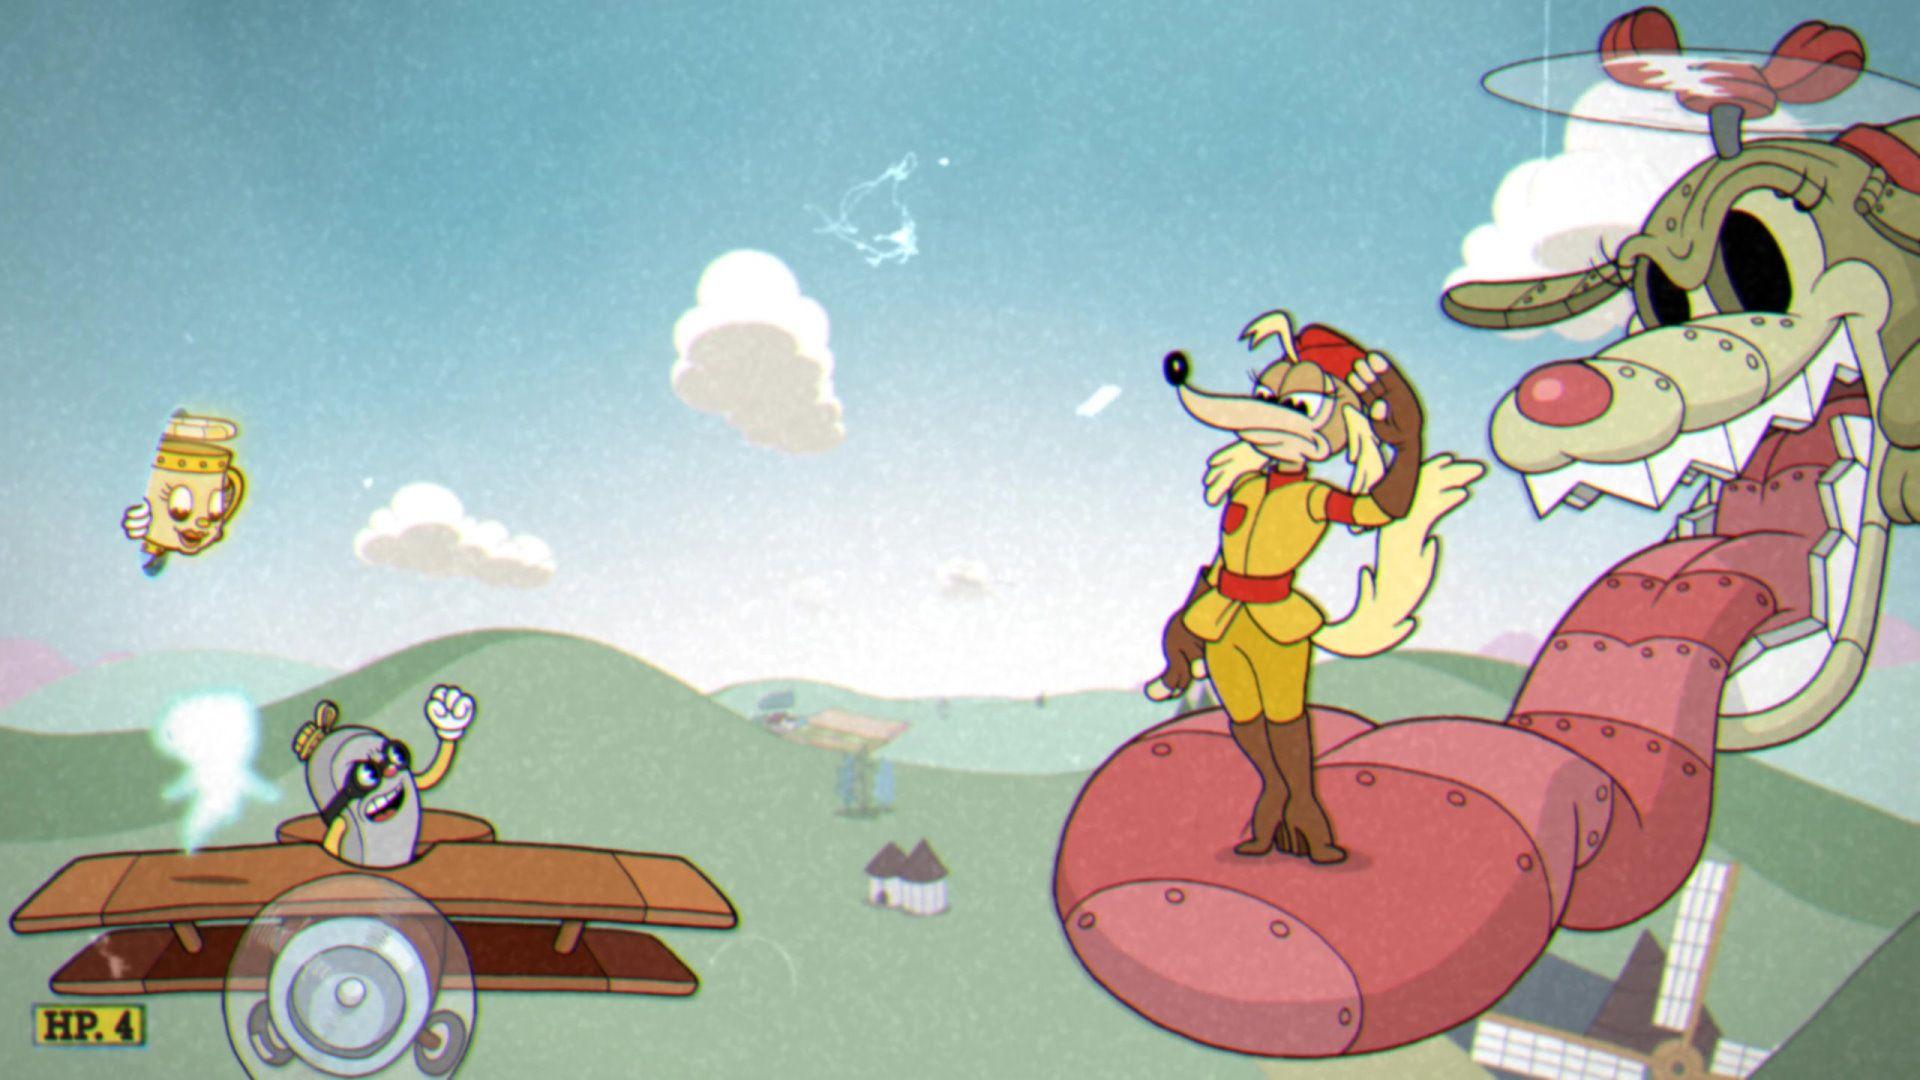 howling aces boss fight in cuphead the delicious last course dlc